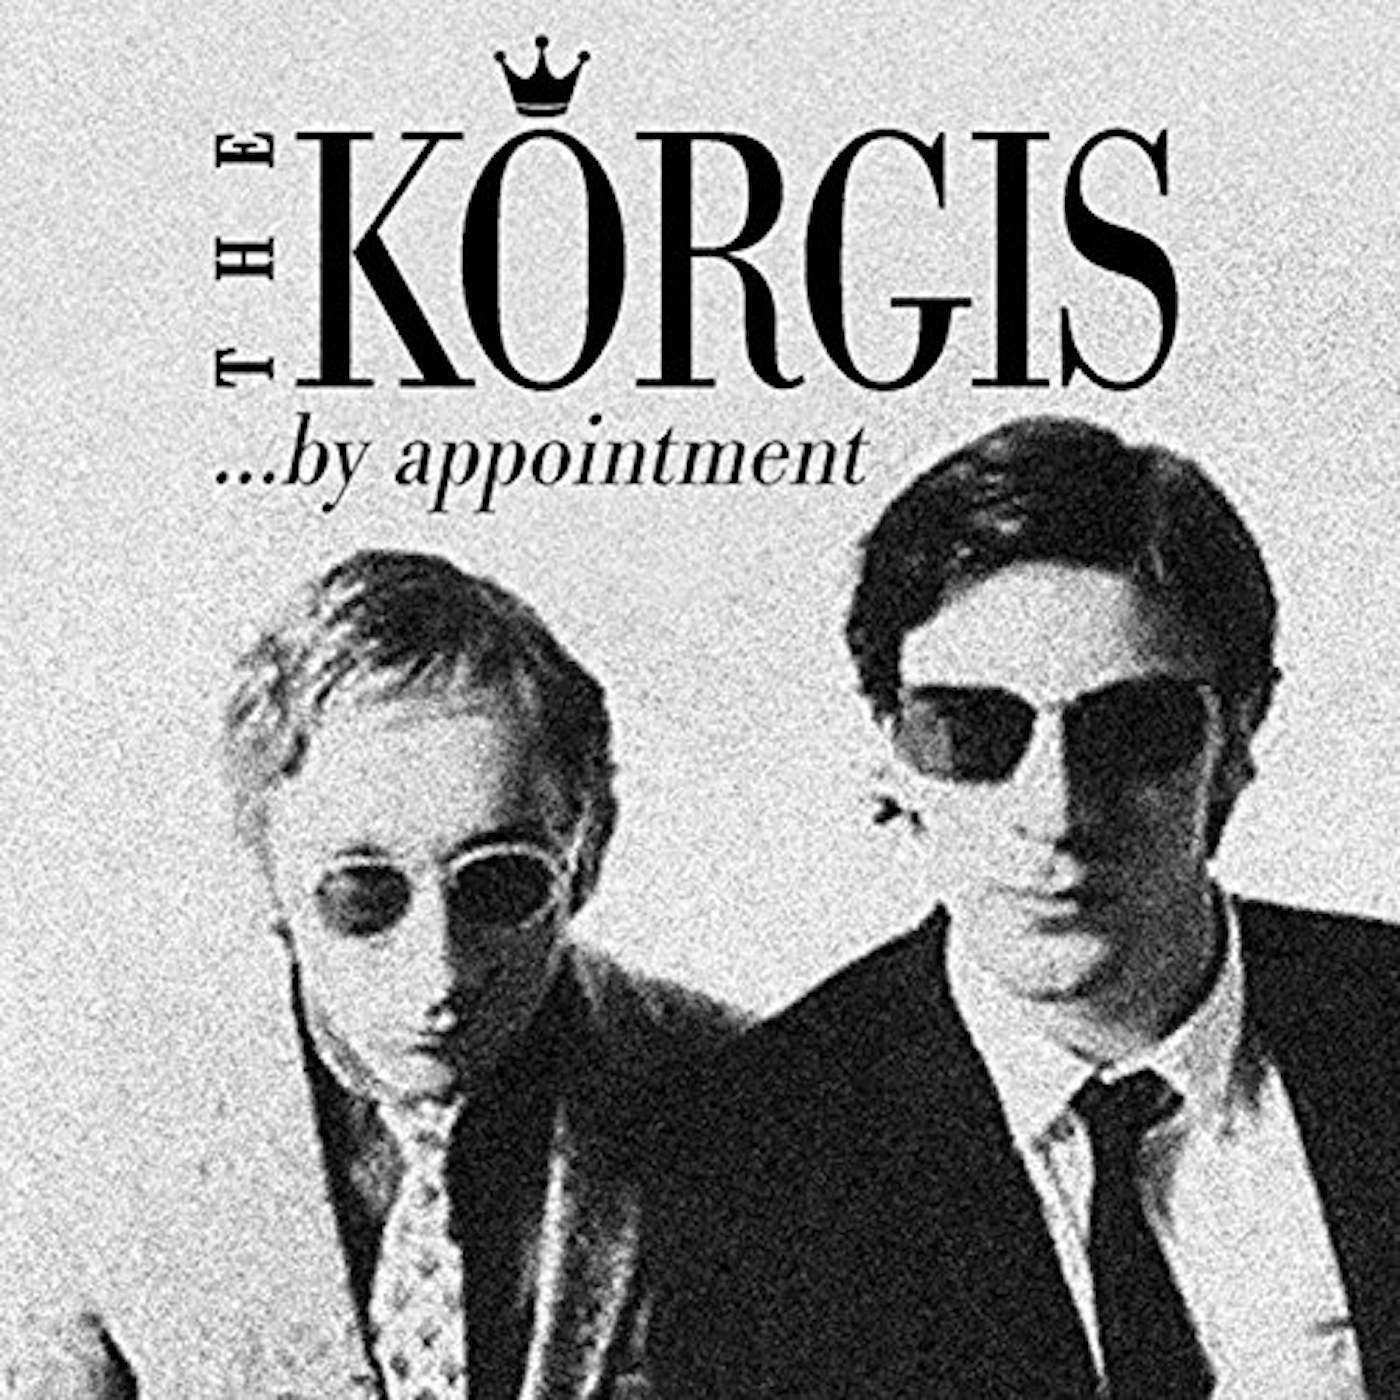 The Korgis BY APPOINTMENT CD